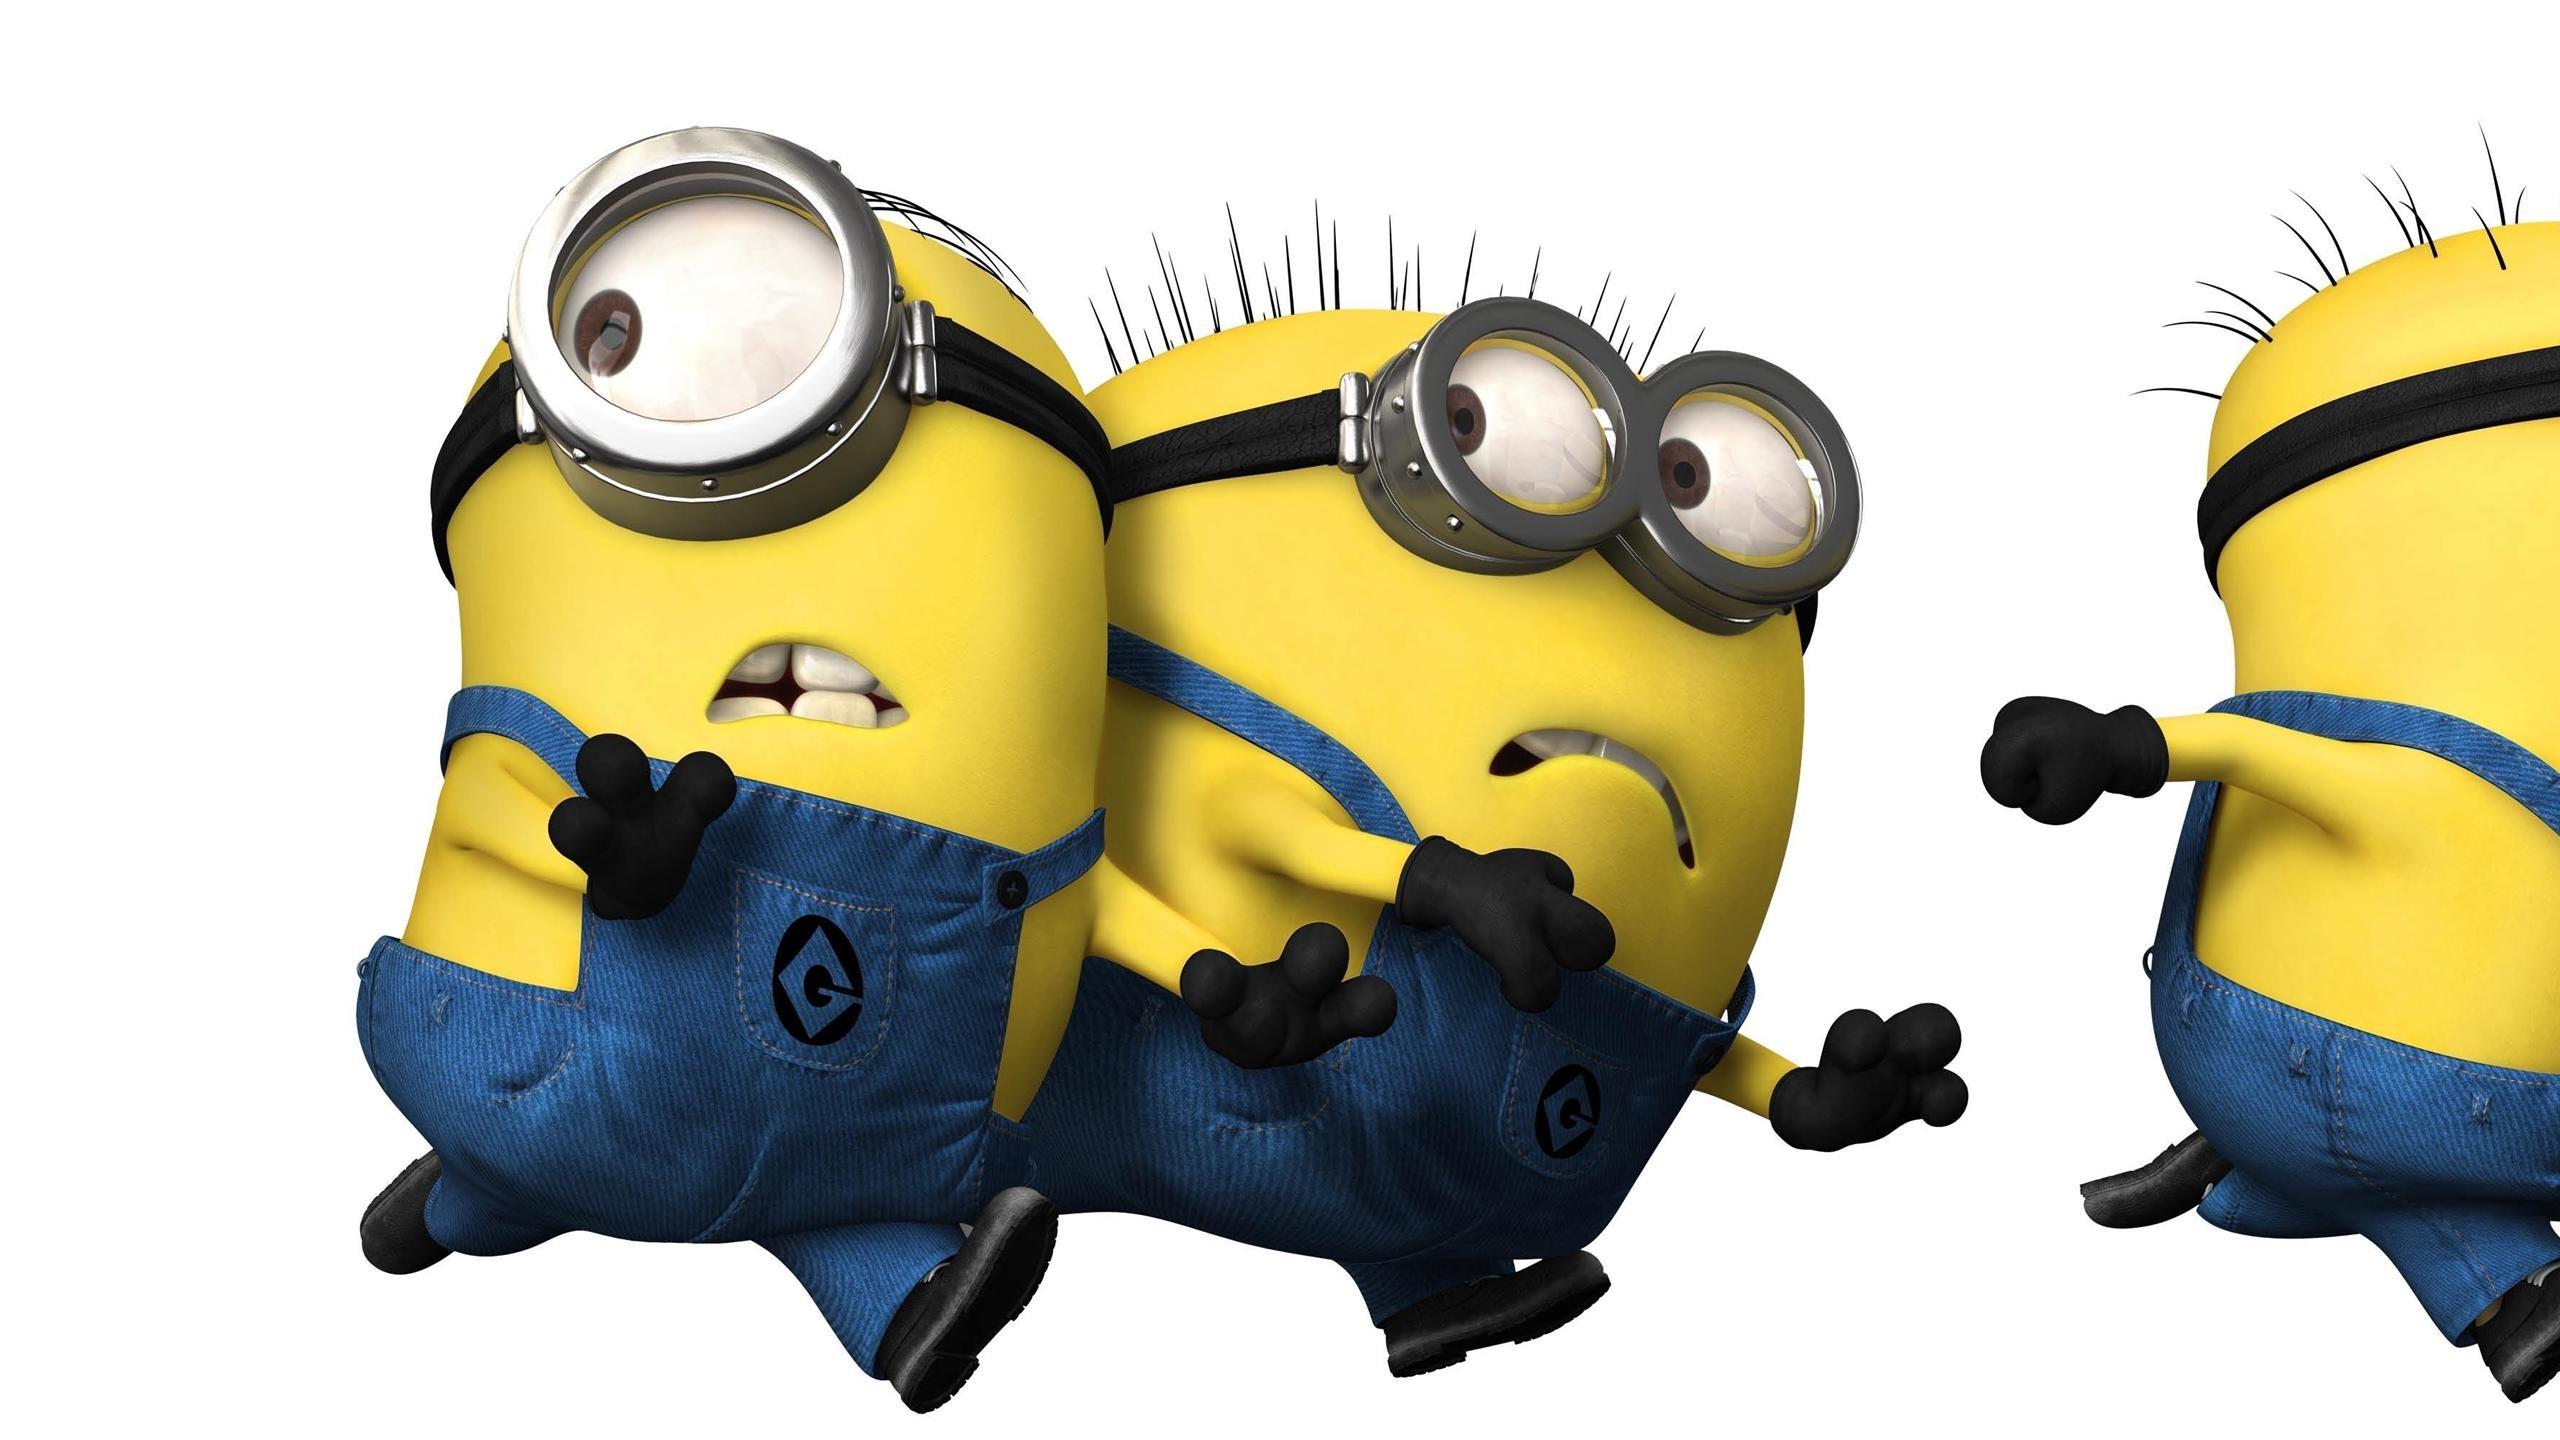 Cartoons Despicable Me Funny Wallpapers Images Photos 2560Ã1440 Minion  Despicable Me Wallpapers (38